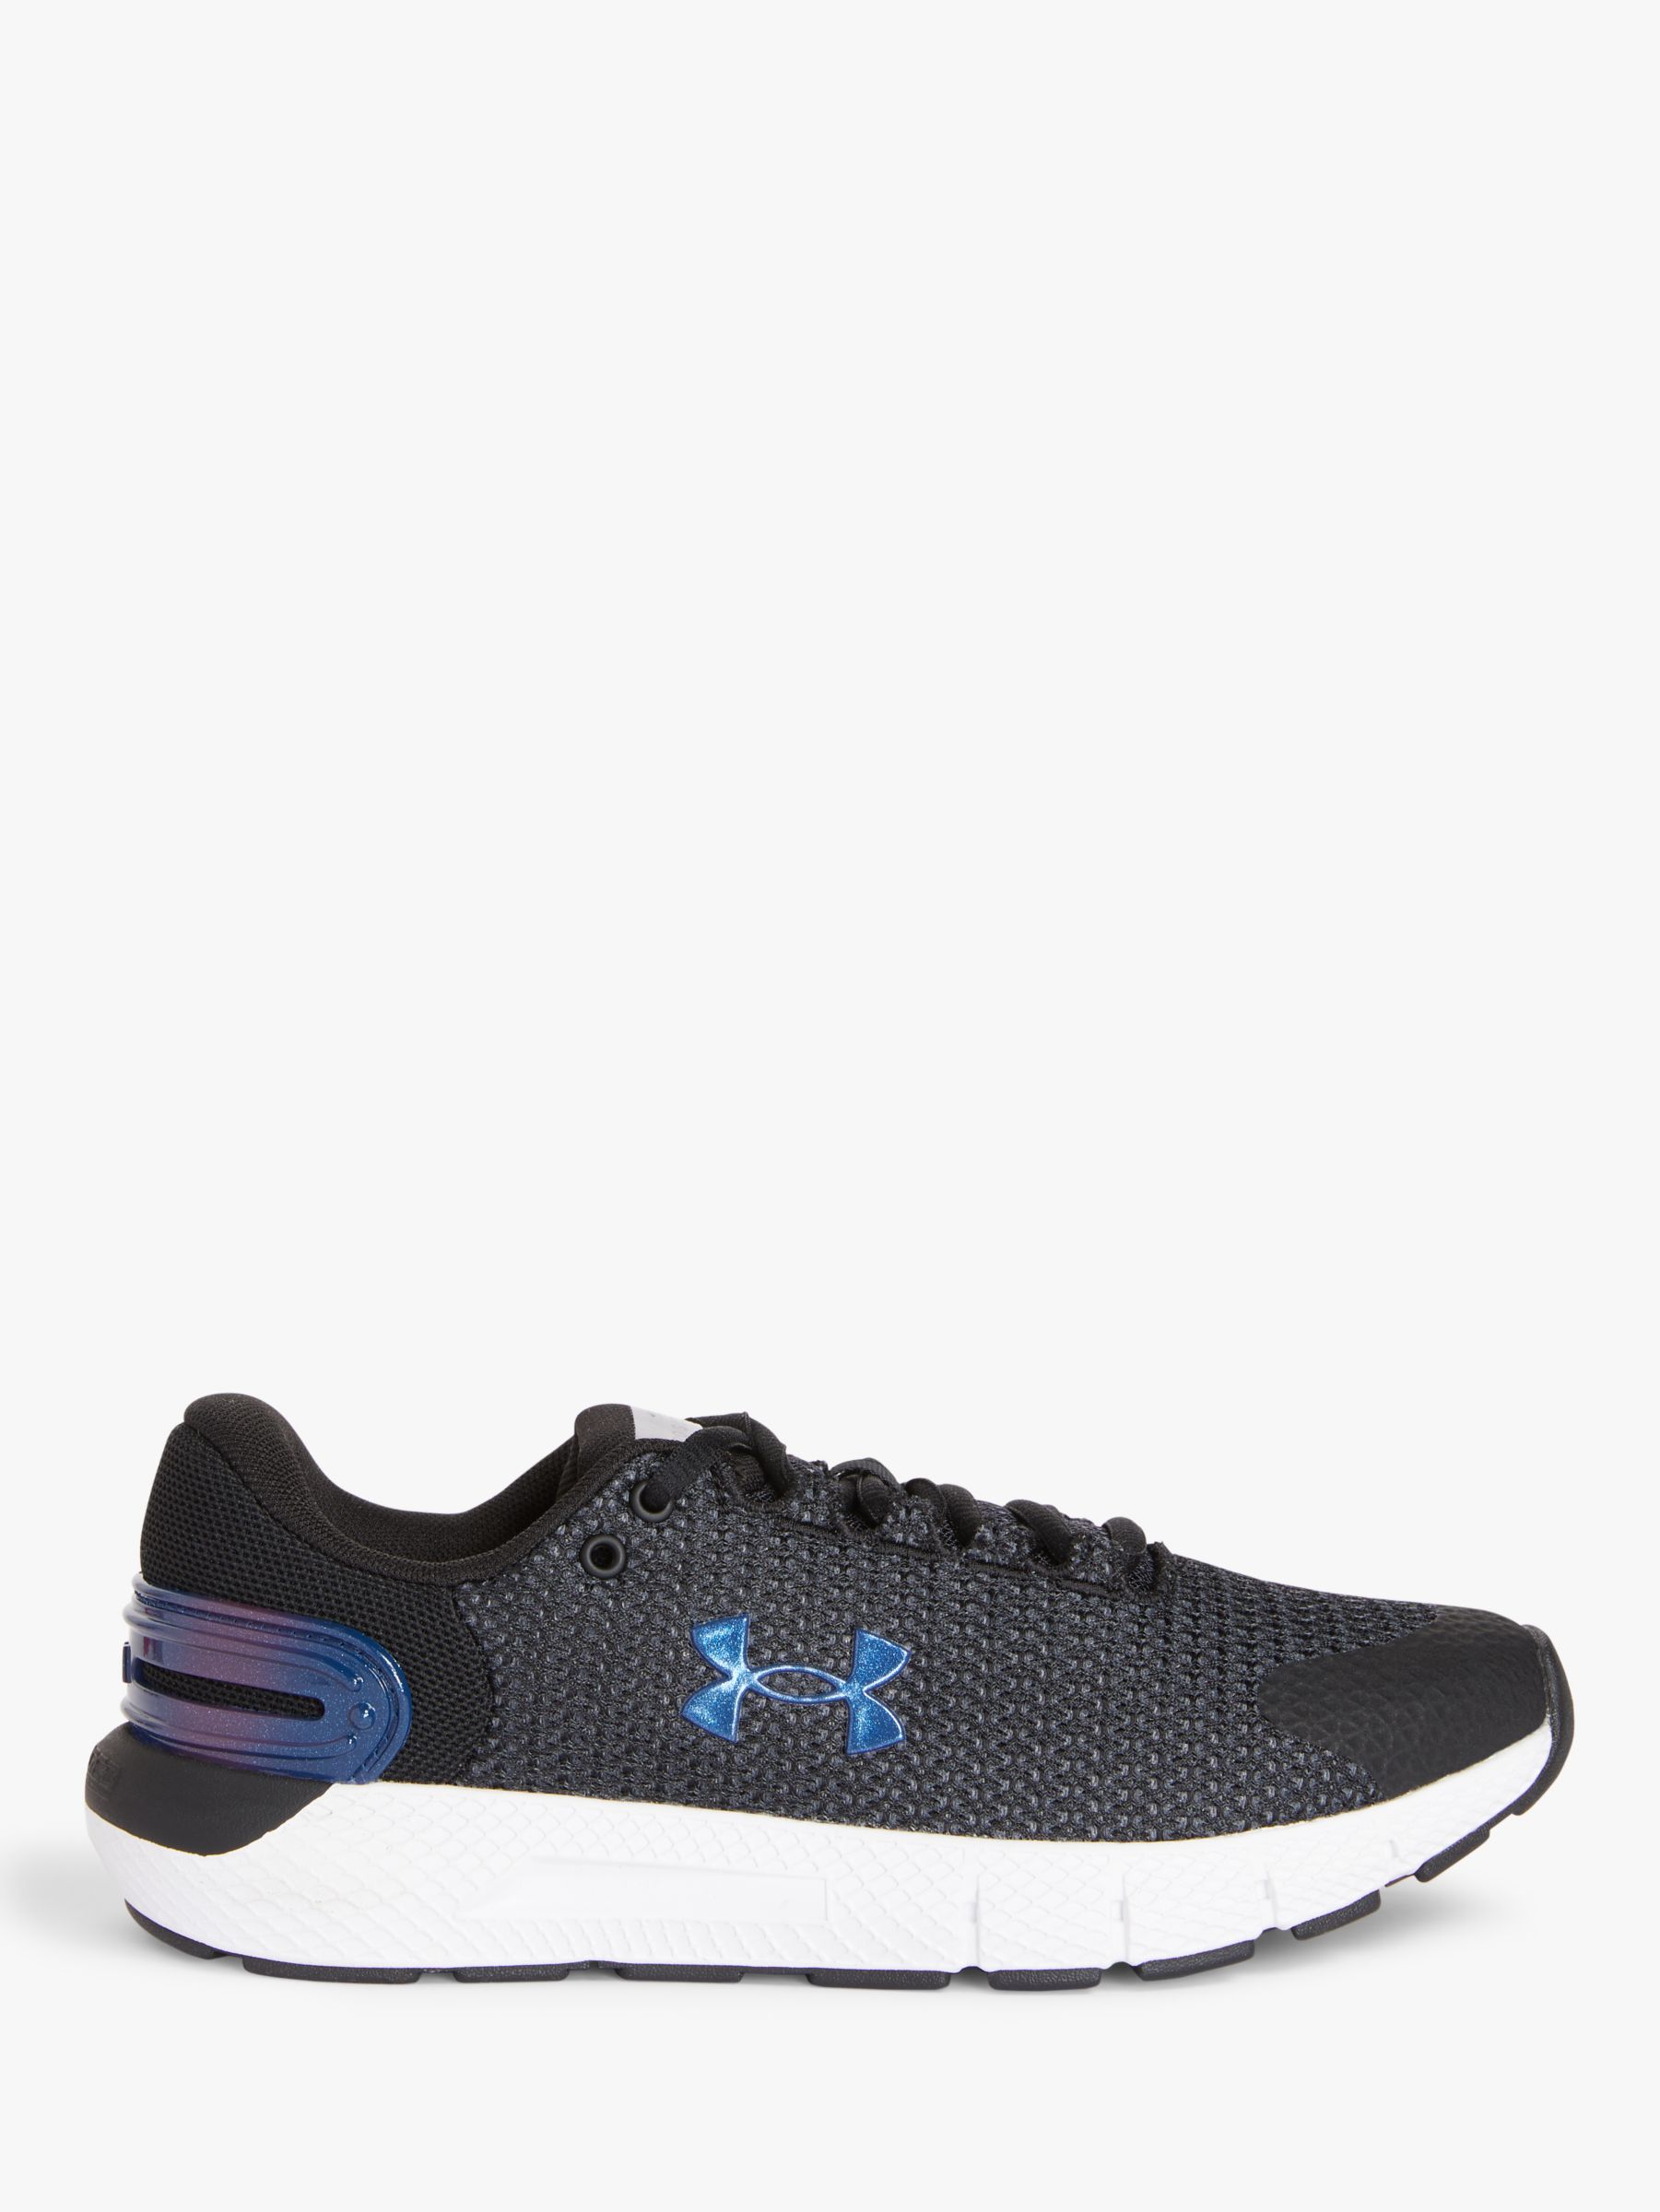 Under Armour Charged Rogue 2.5 Women's Running Shoes